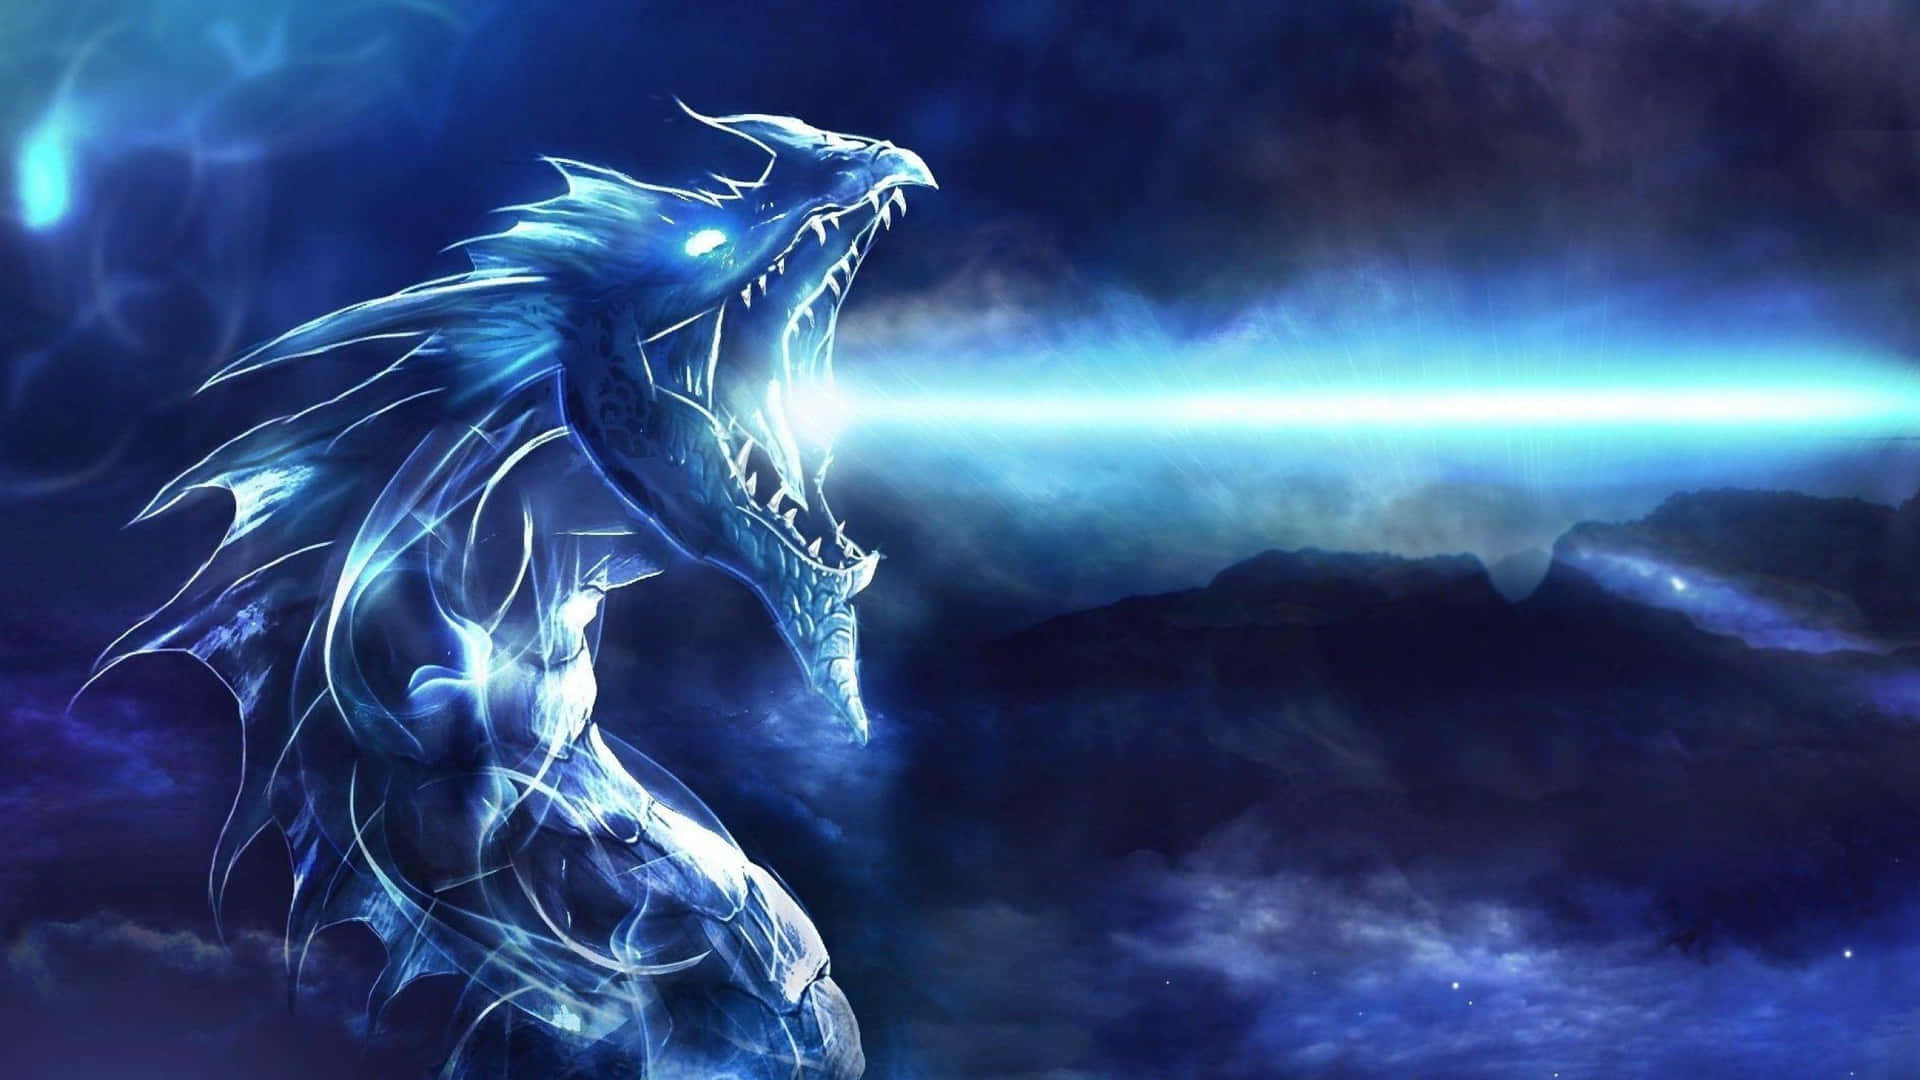 A fantastical picture of an awesome and cool dragon Wallpaper